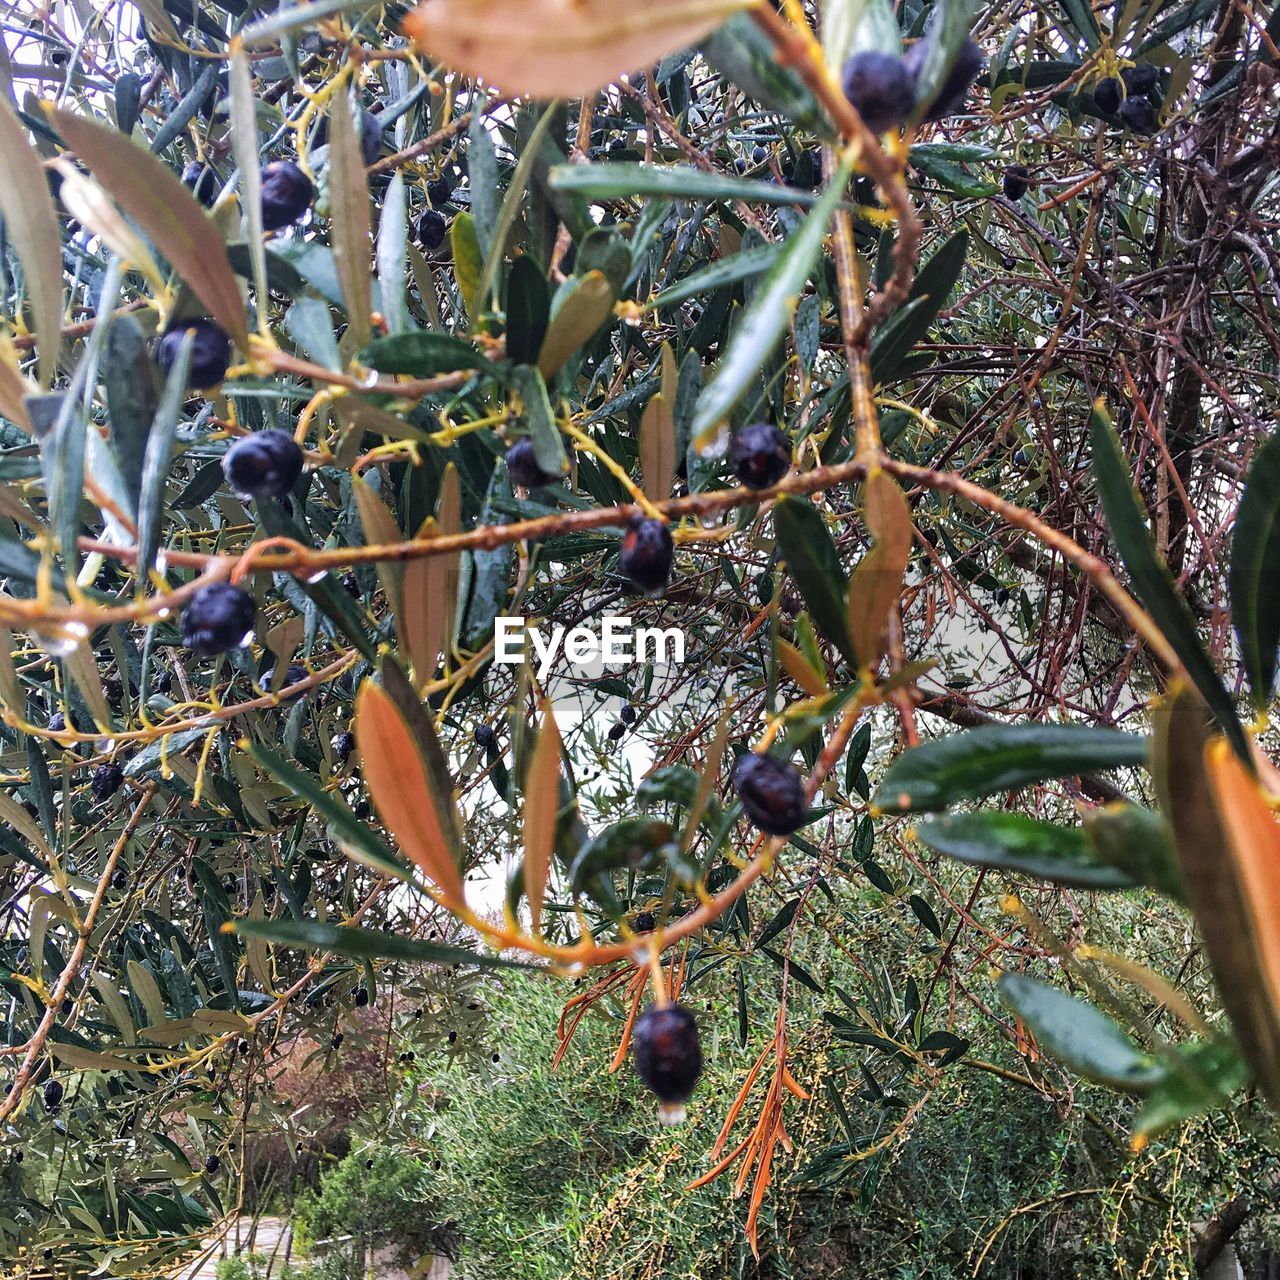 CLOSE-UP OF FRUIT HANGING ON TREE